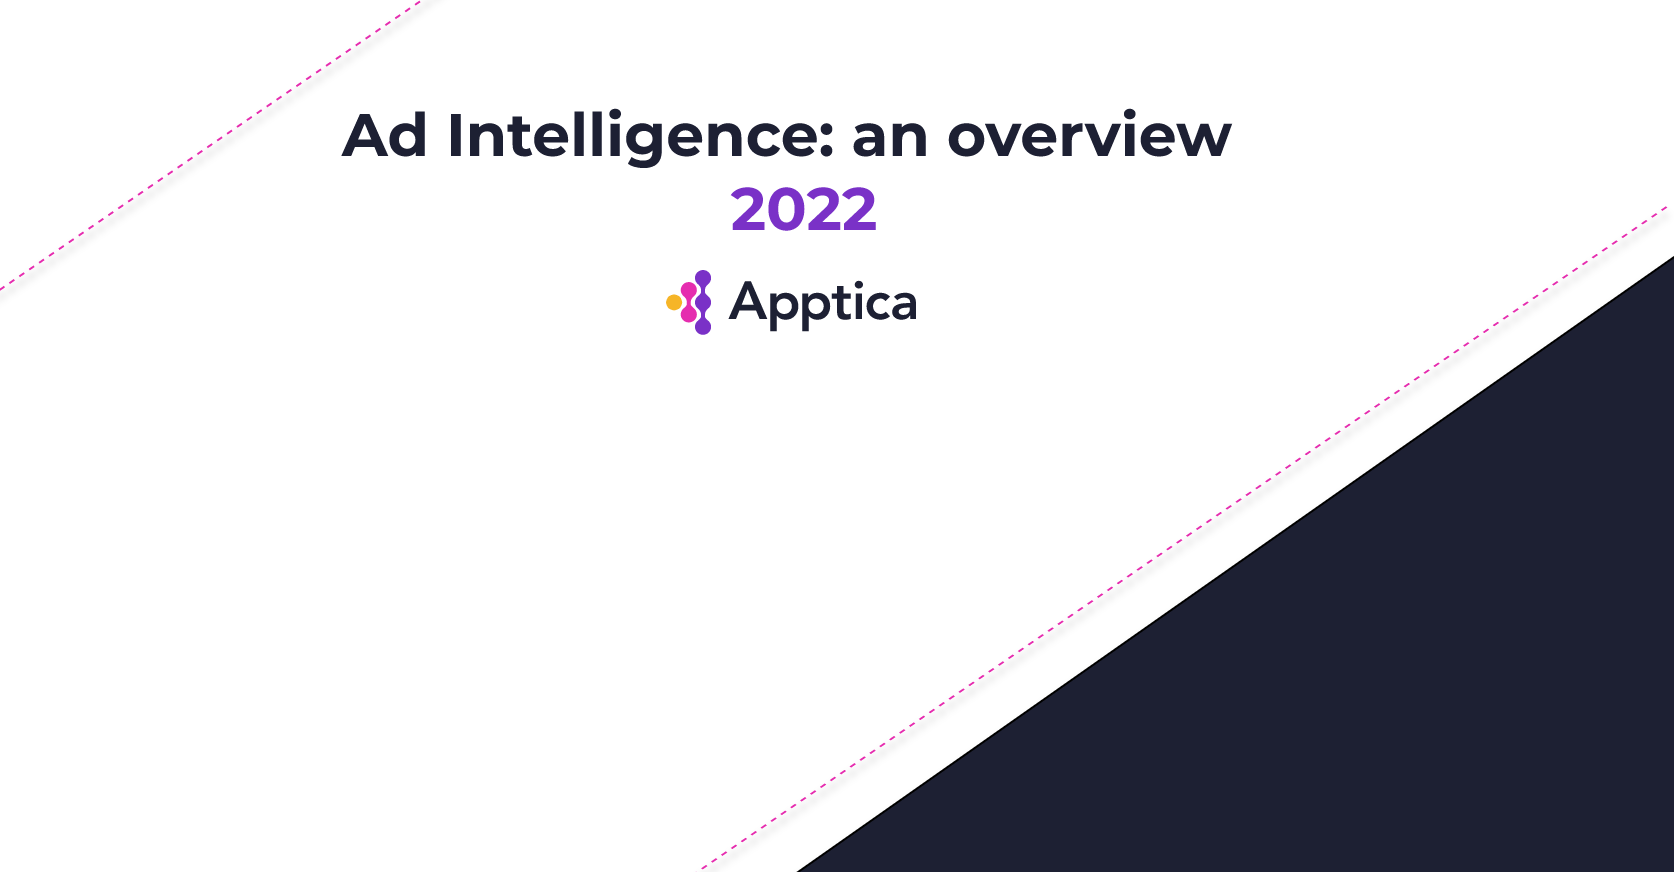 Ad Intelligence: an overview 2022